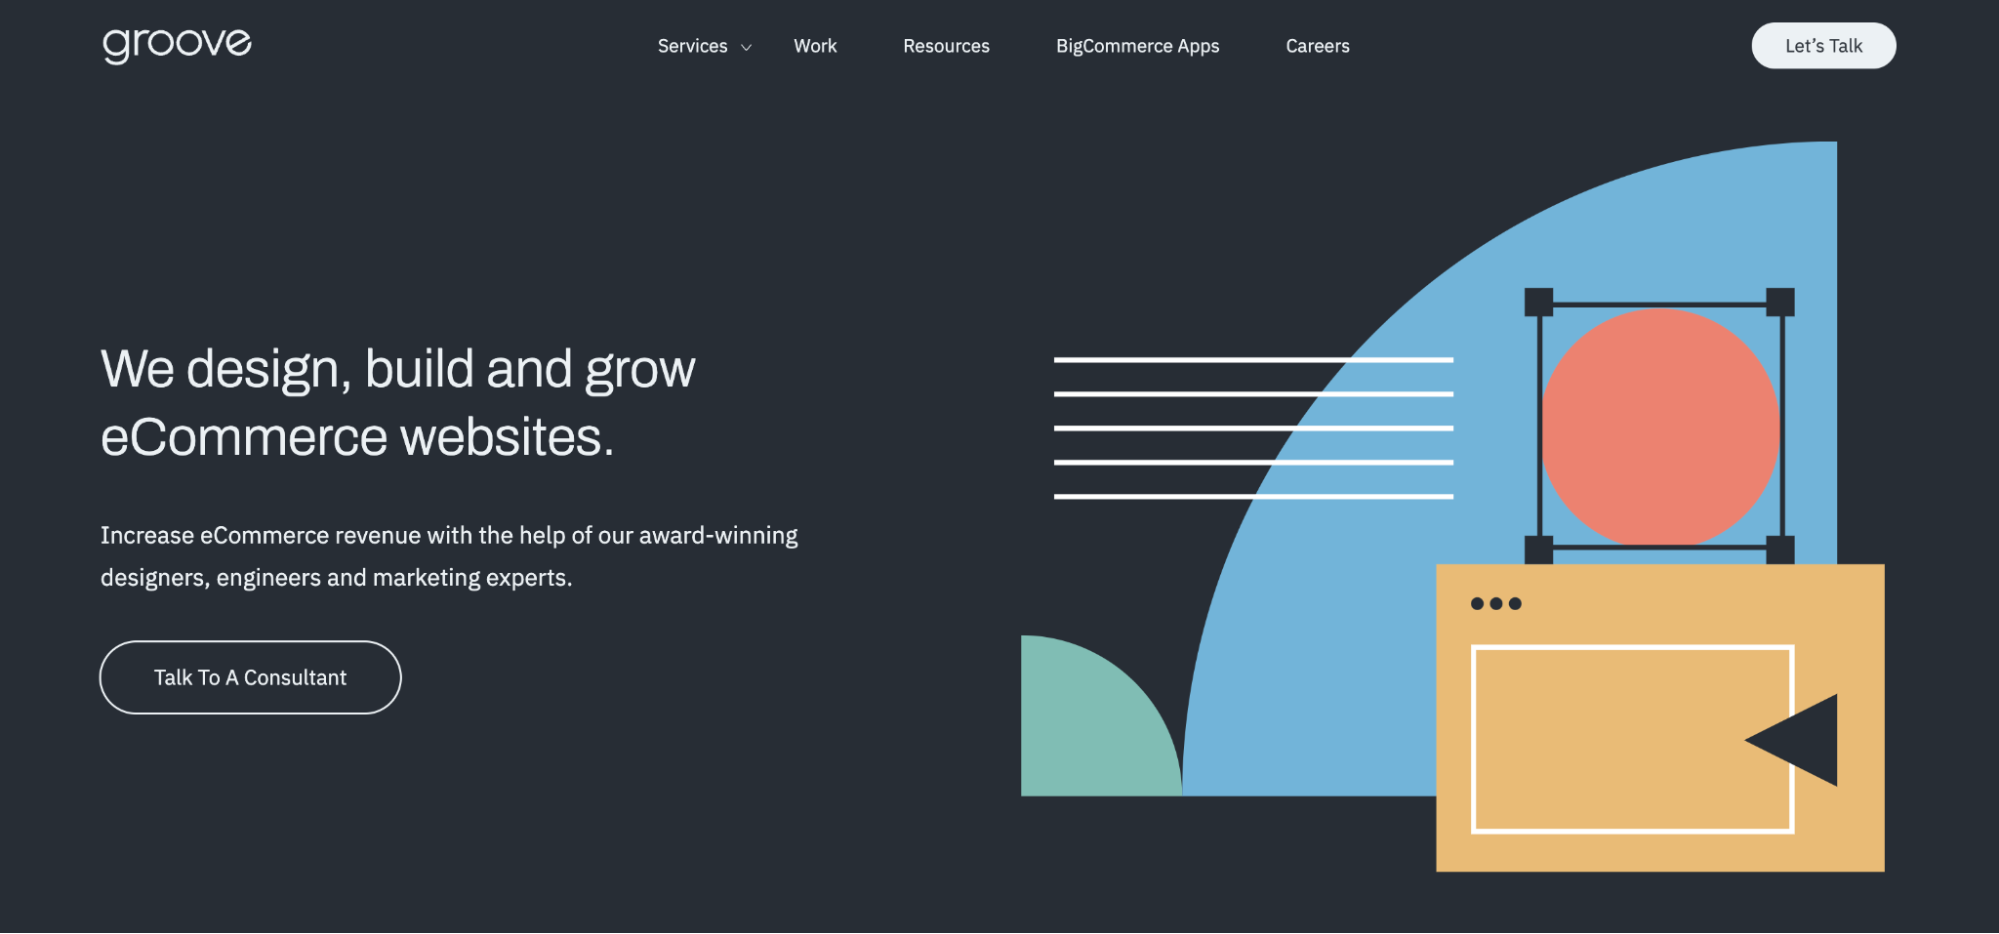 Groove Commerce homepage with abstract design in pastel colors representing elements of a website.